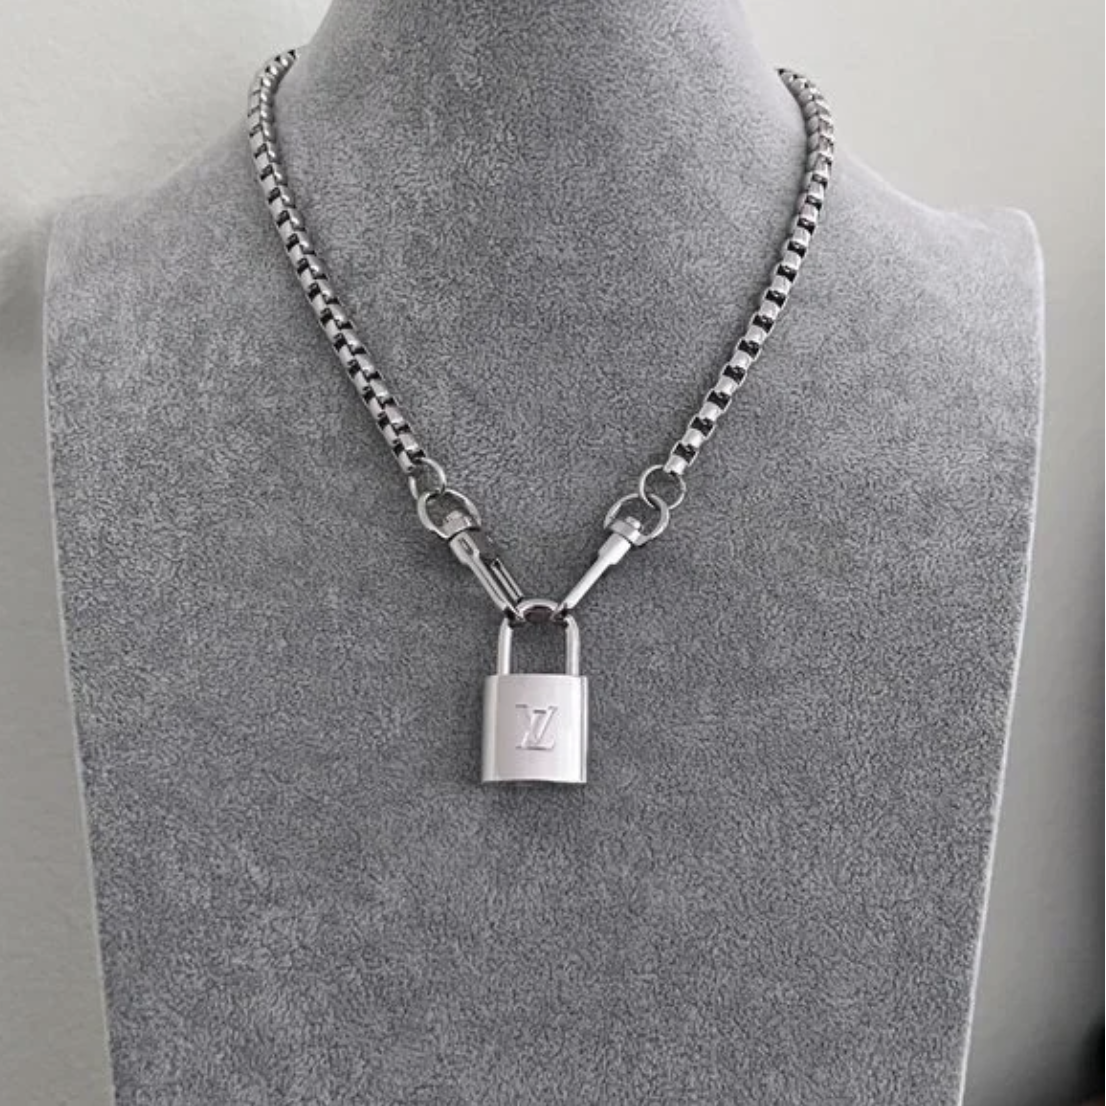 New Louis Vuitton Silver-Toned Lock with 18 Box Link Chain Necklace